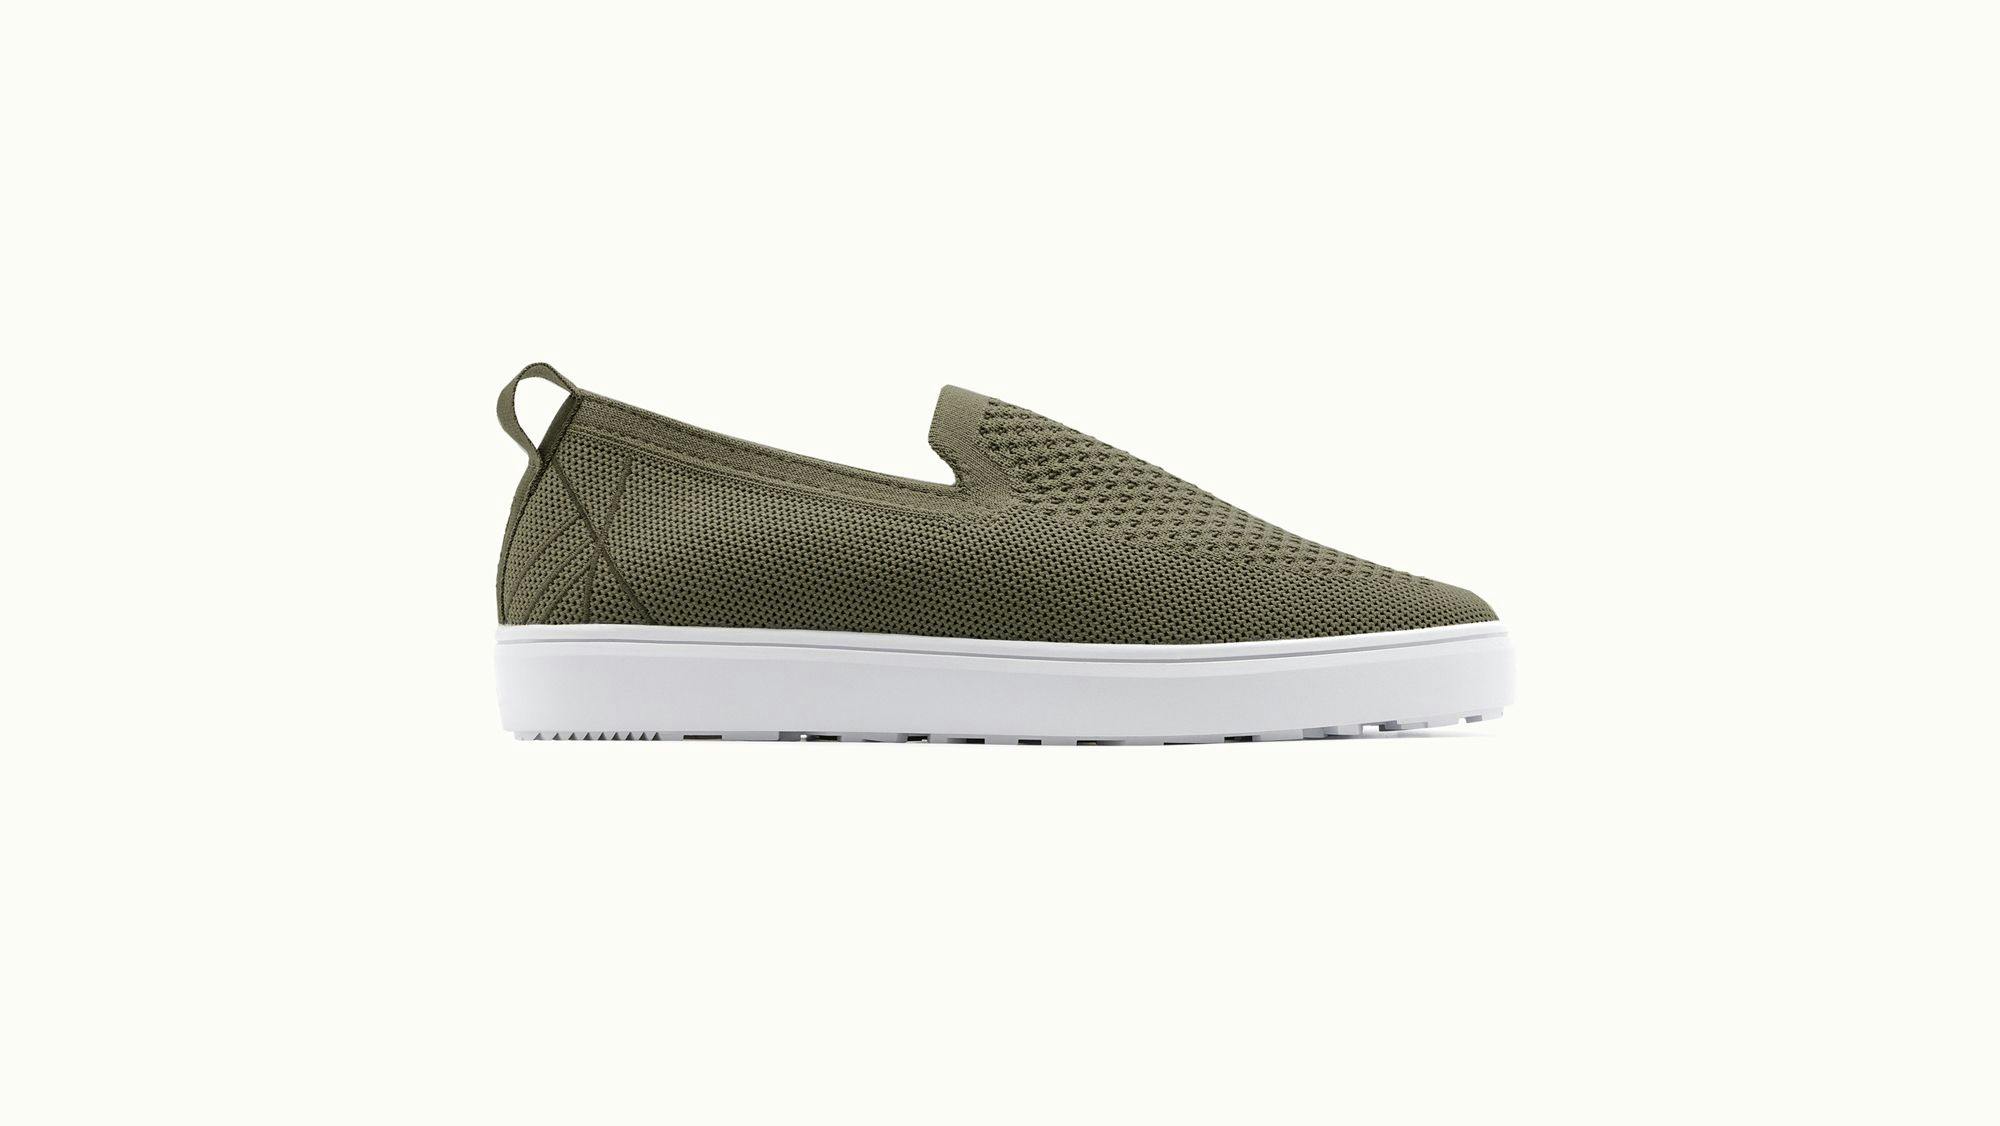 Dive into summer with Stavern breathable slip-on sneakers, crafted for cool comfort and effortless maintenance with their machine-washable design.